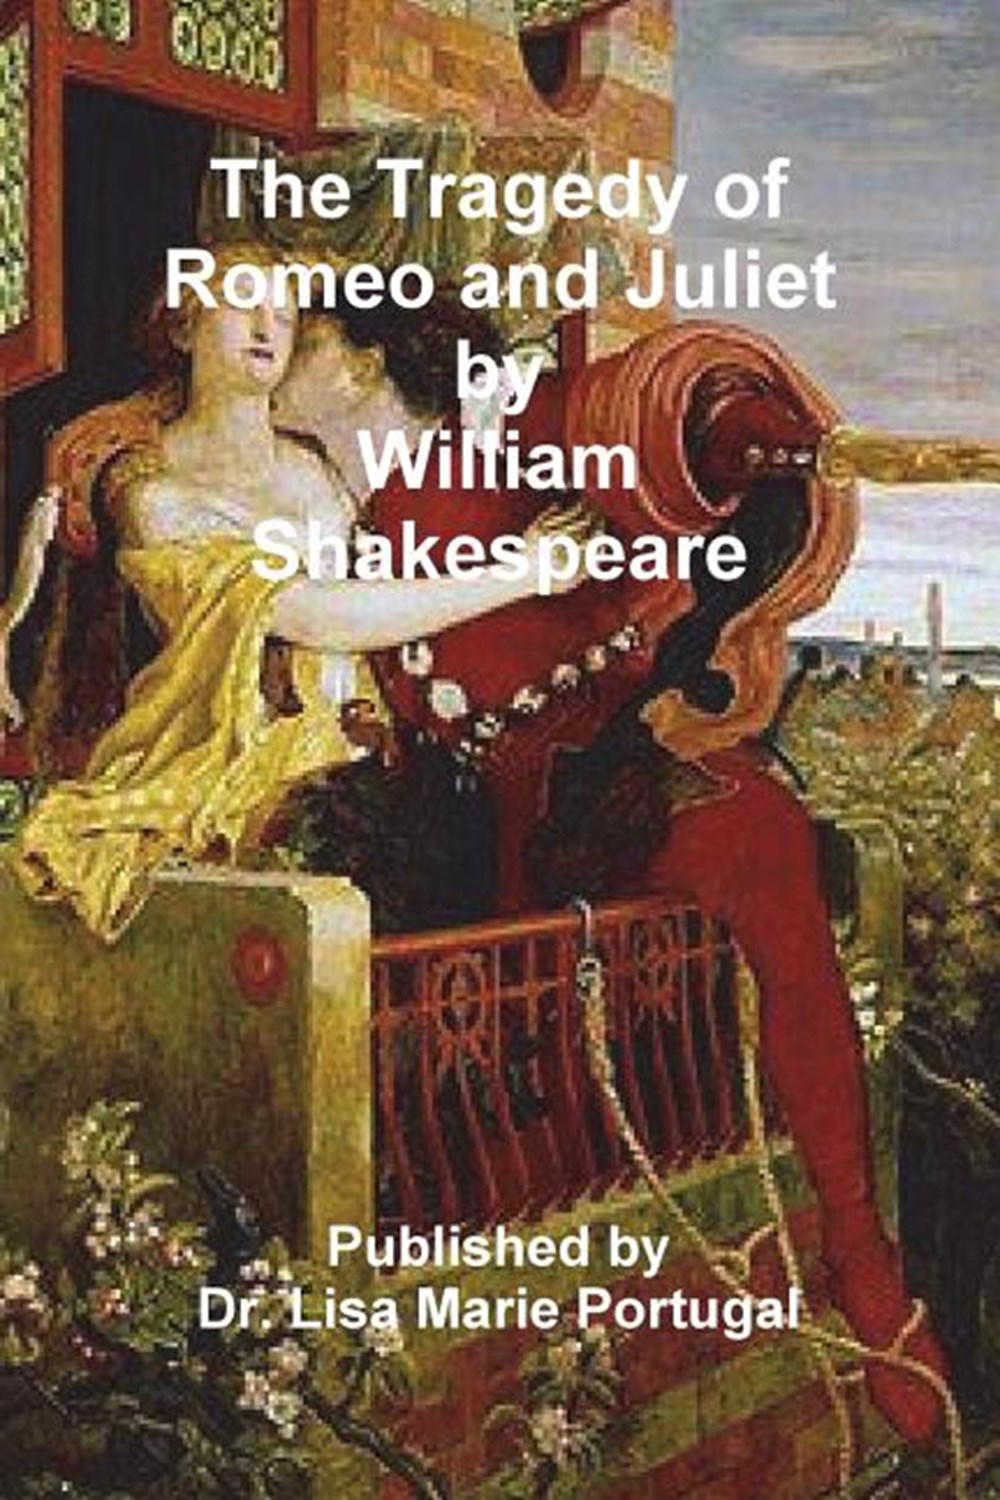 Tragedy of Romeo and Juliet by William Shakespeare